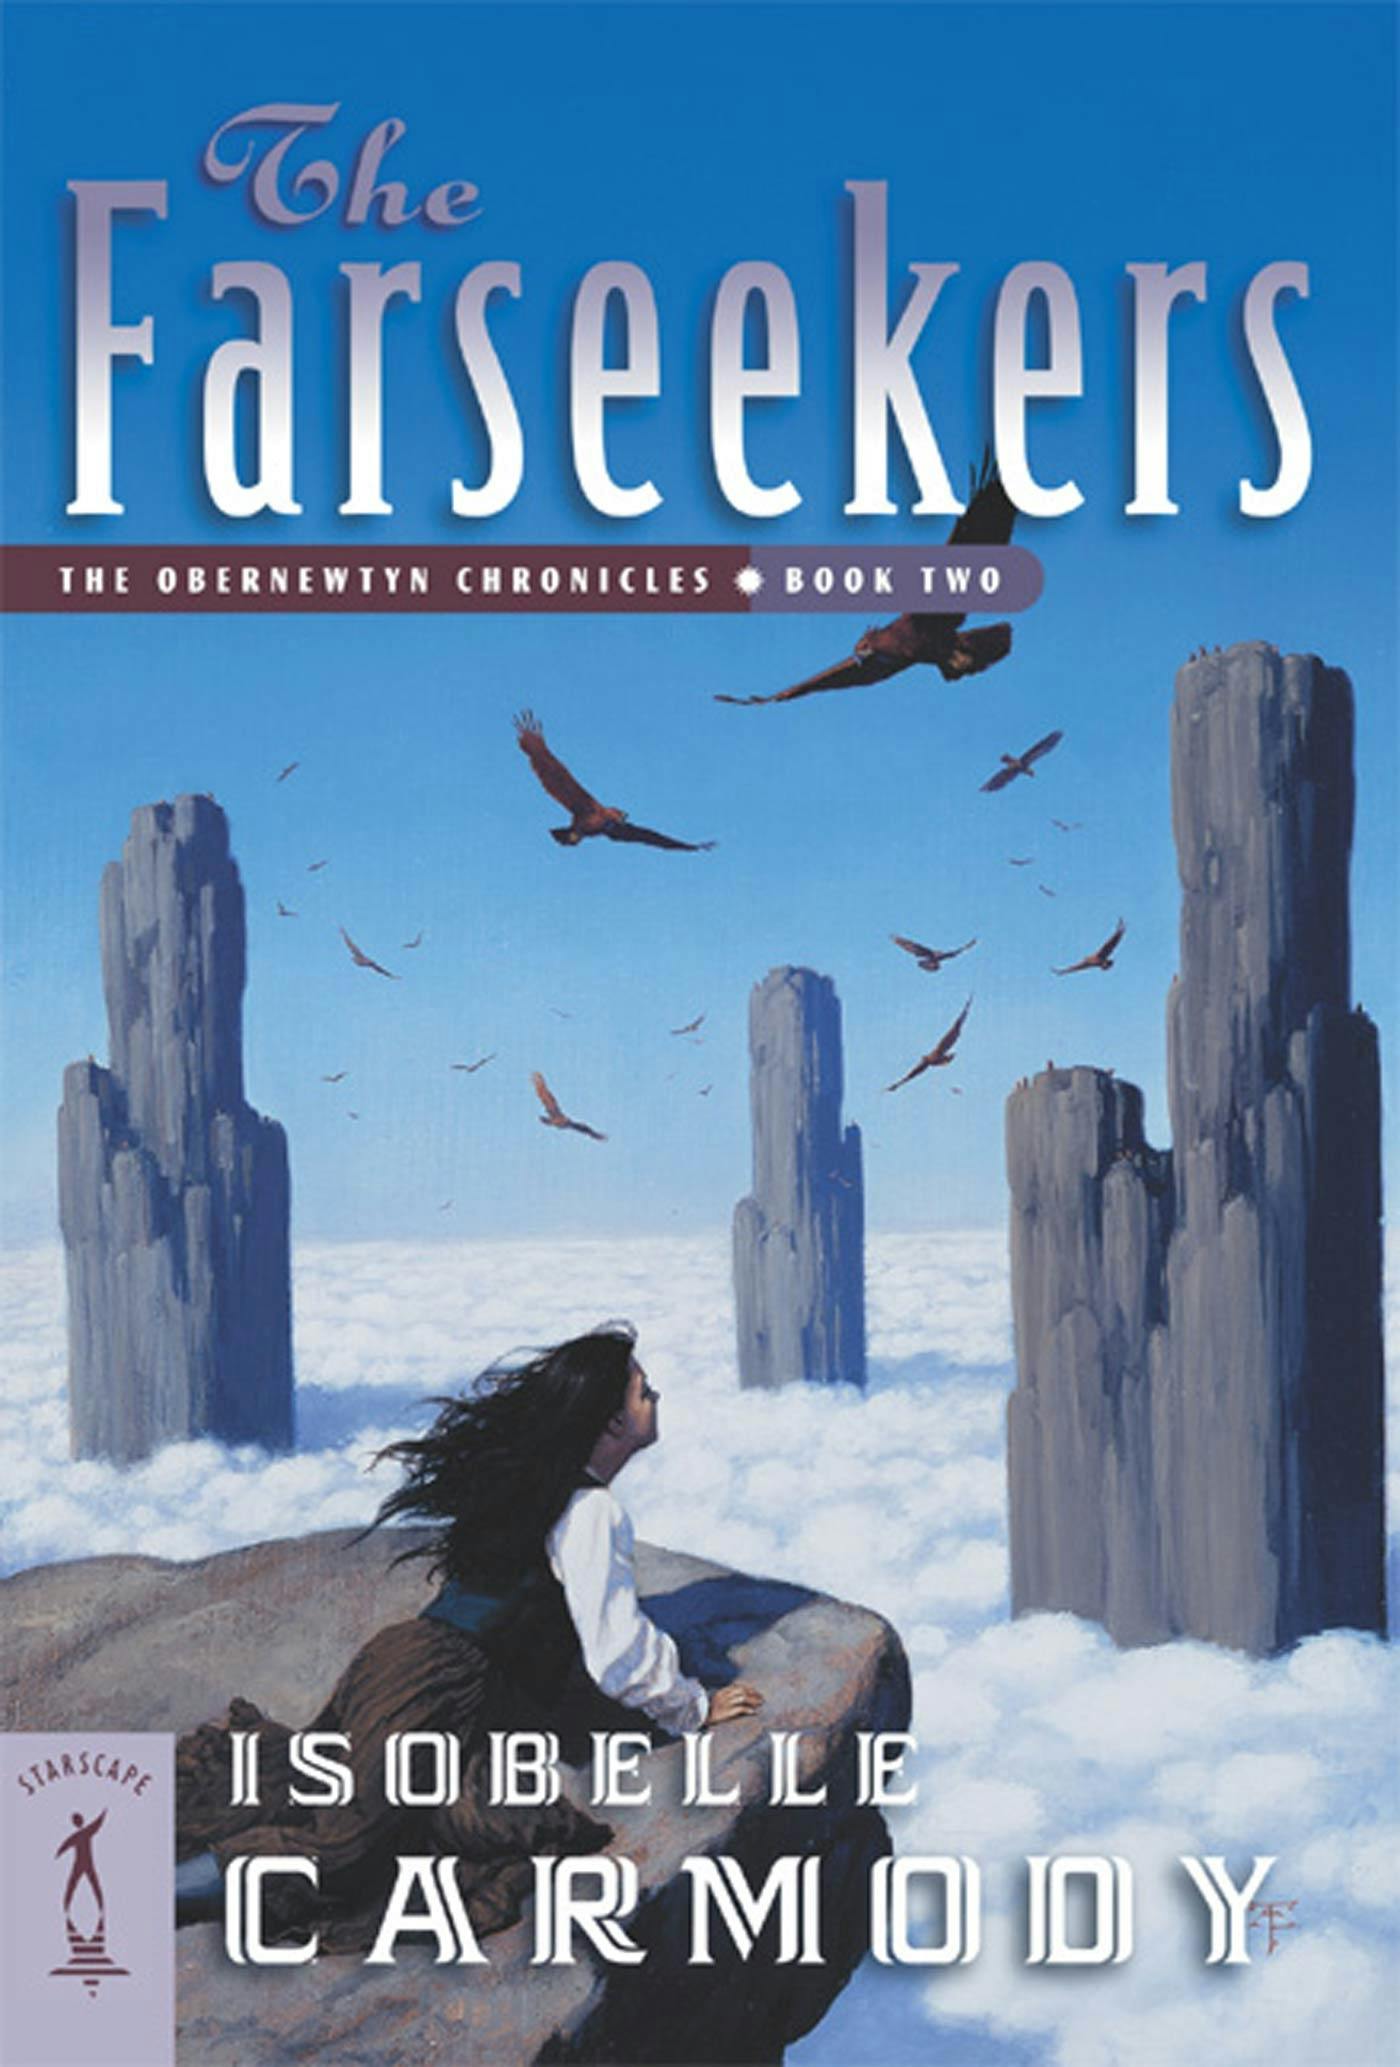 Cover for the book titled as: The Farseekers